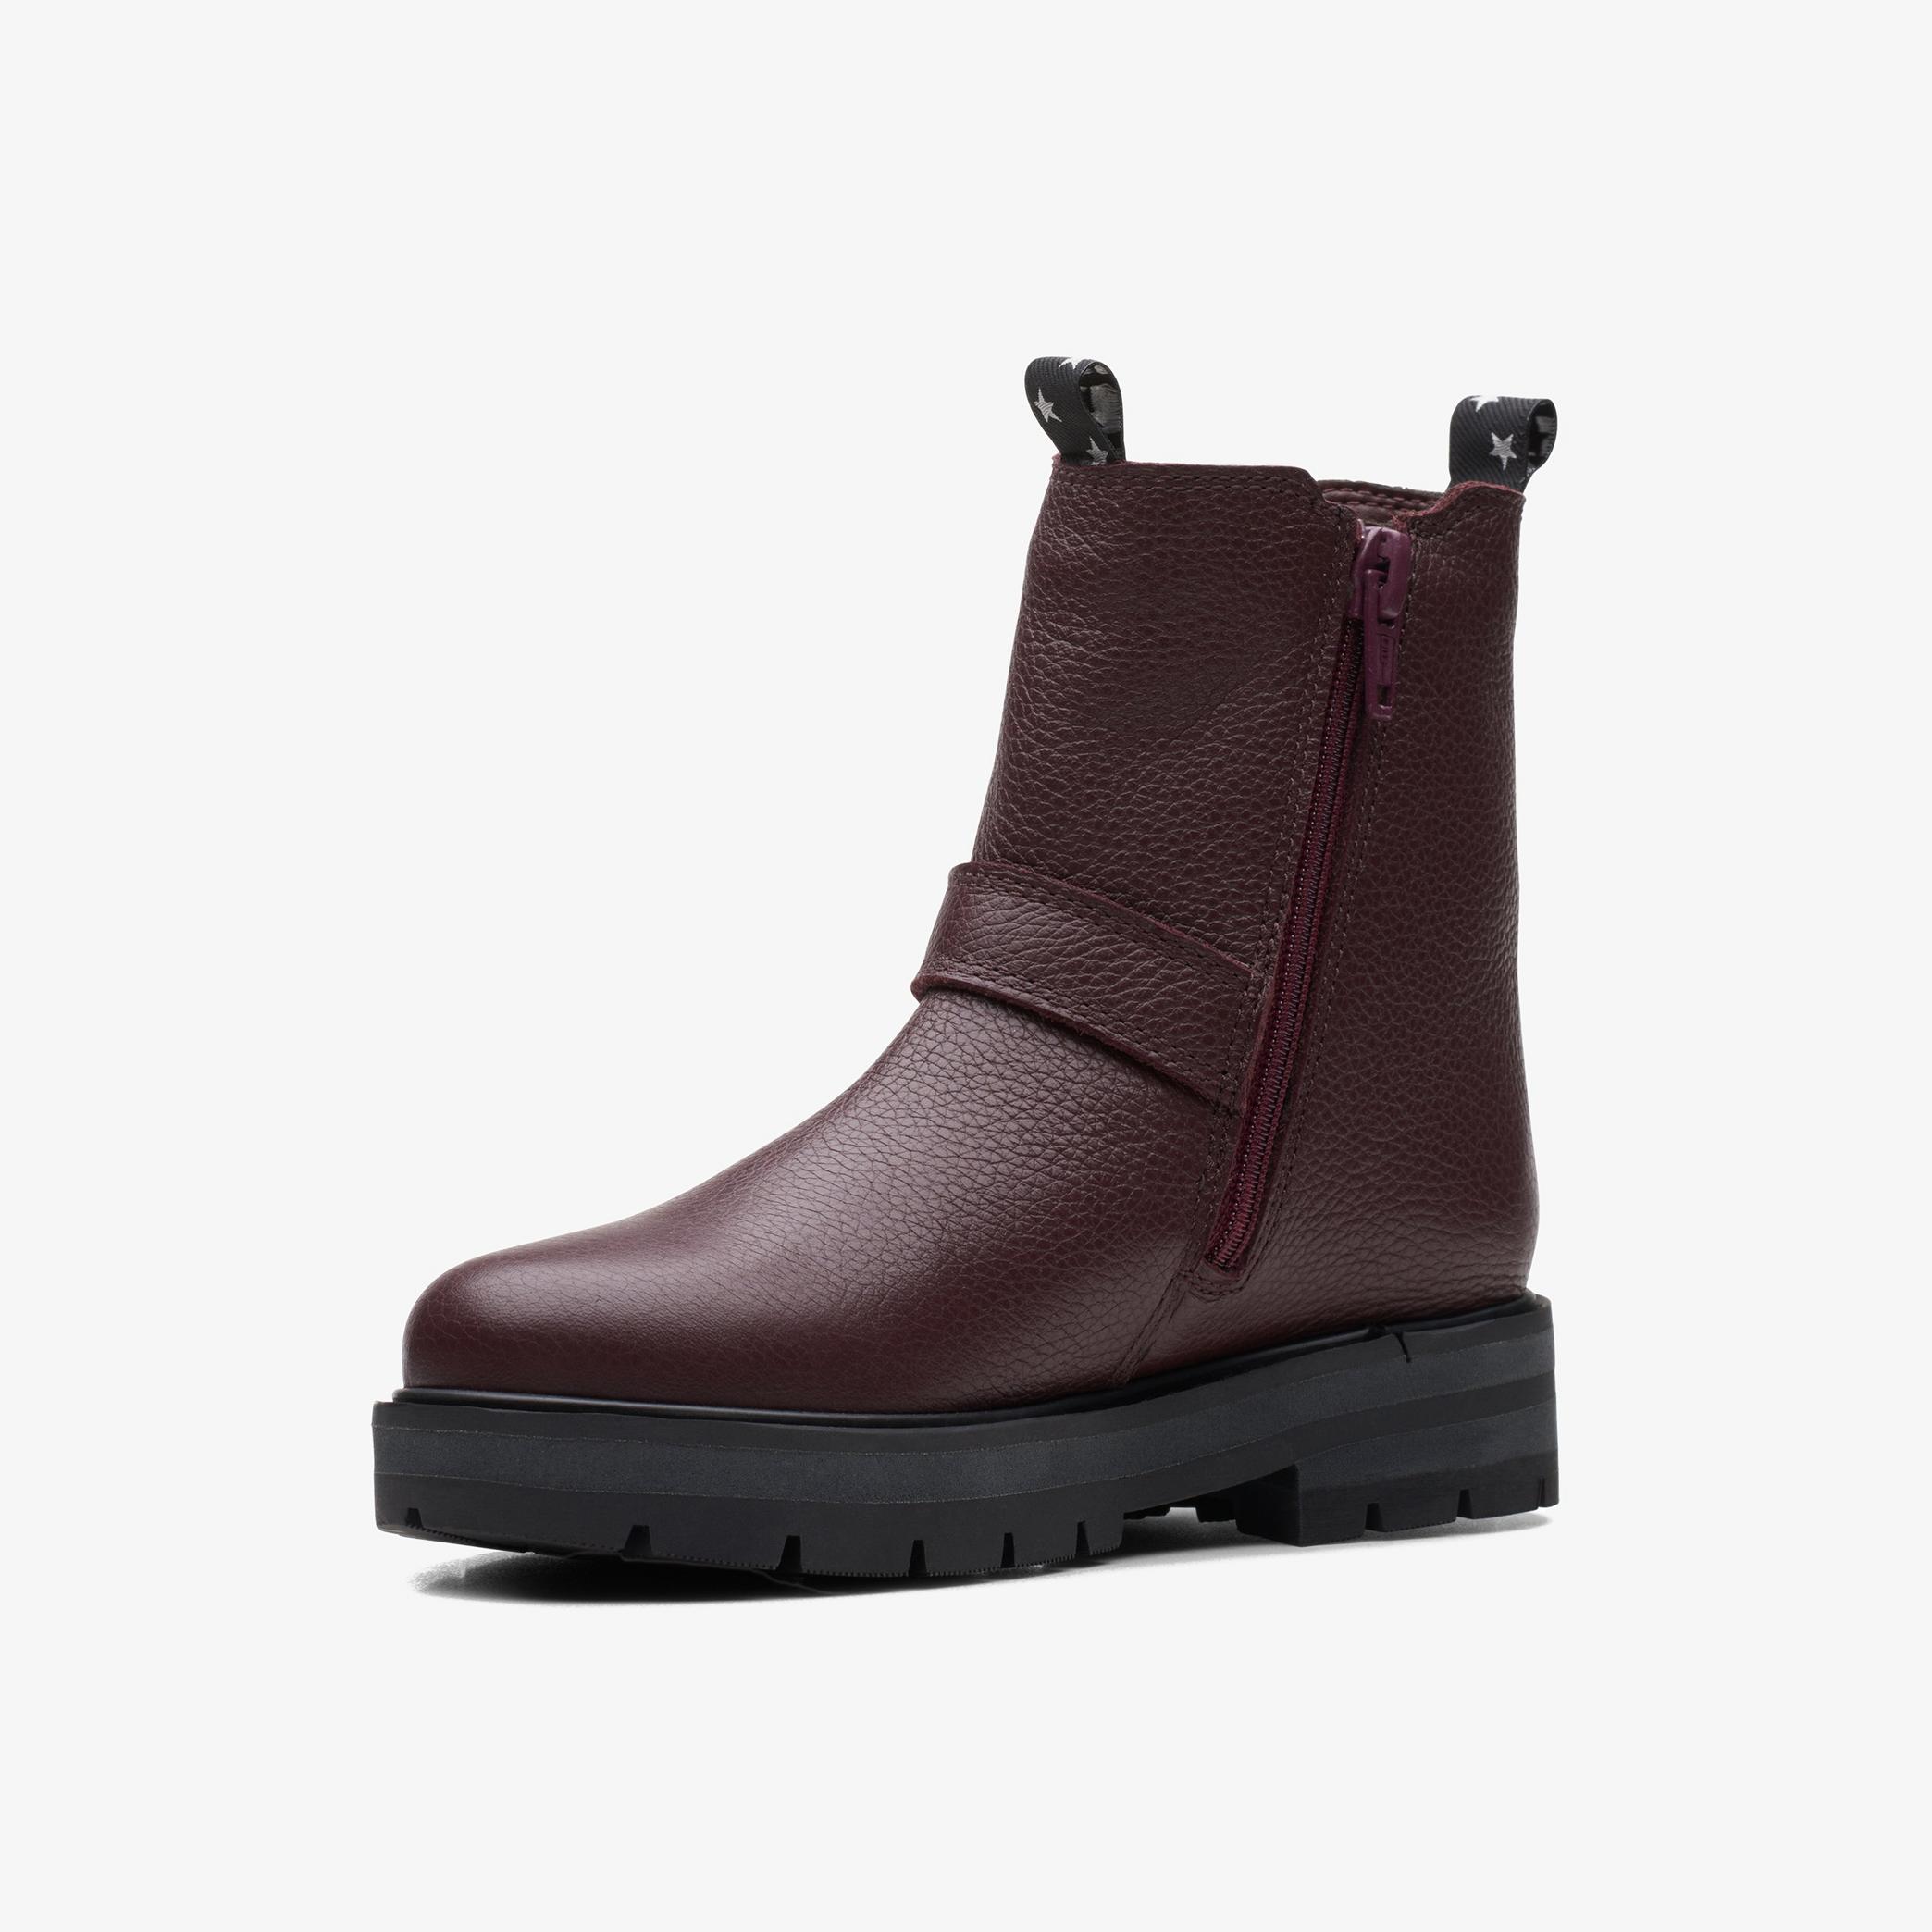 Prague River Kid Burgundy Leather Ankle Boots, view 4 of 6